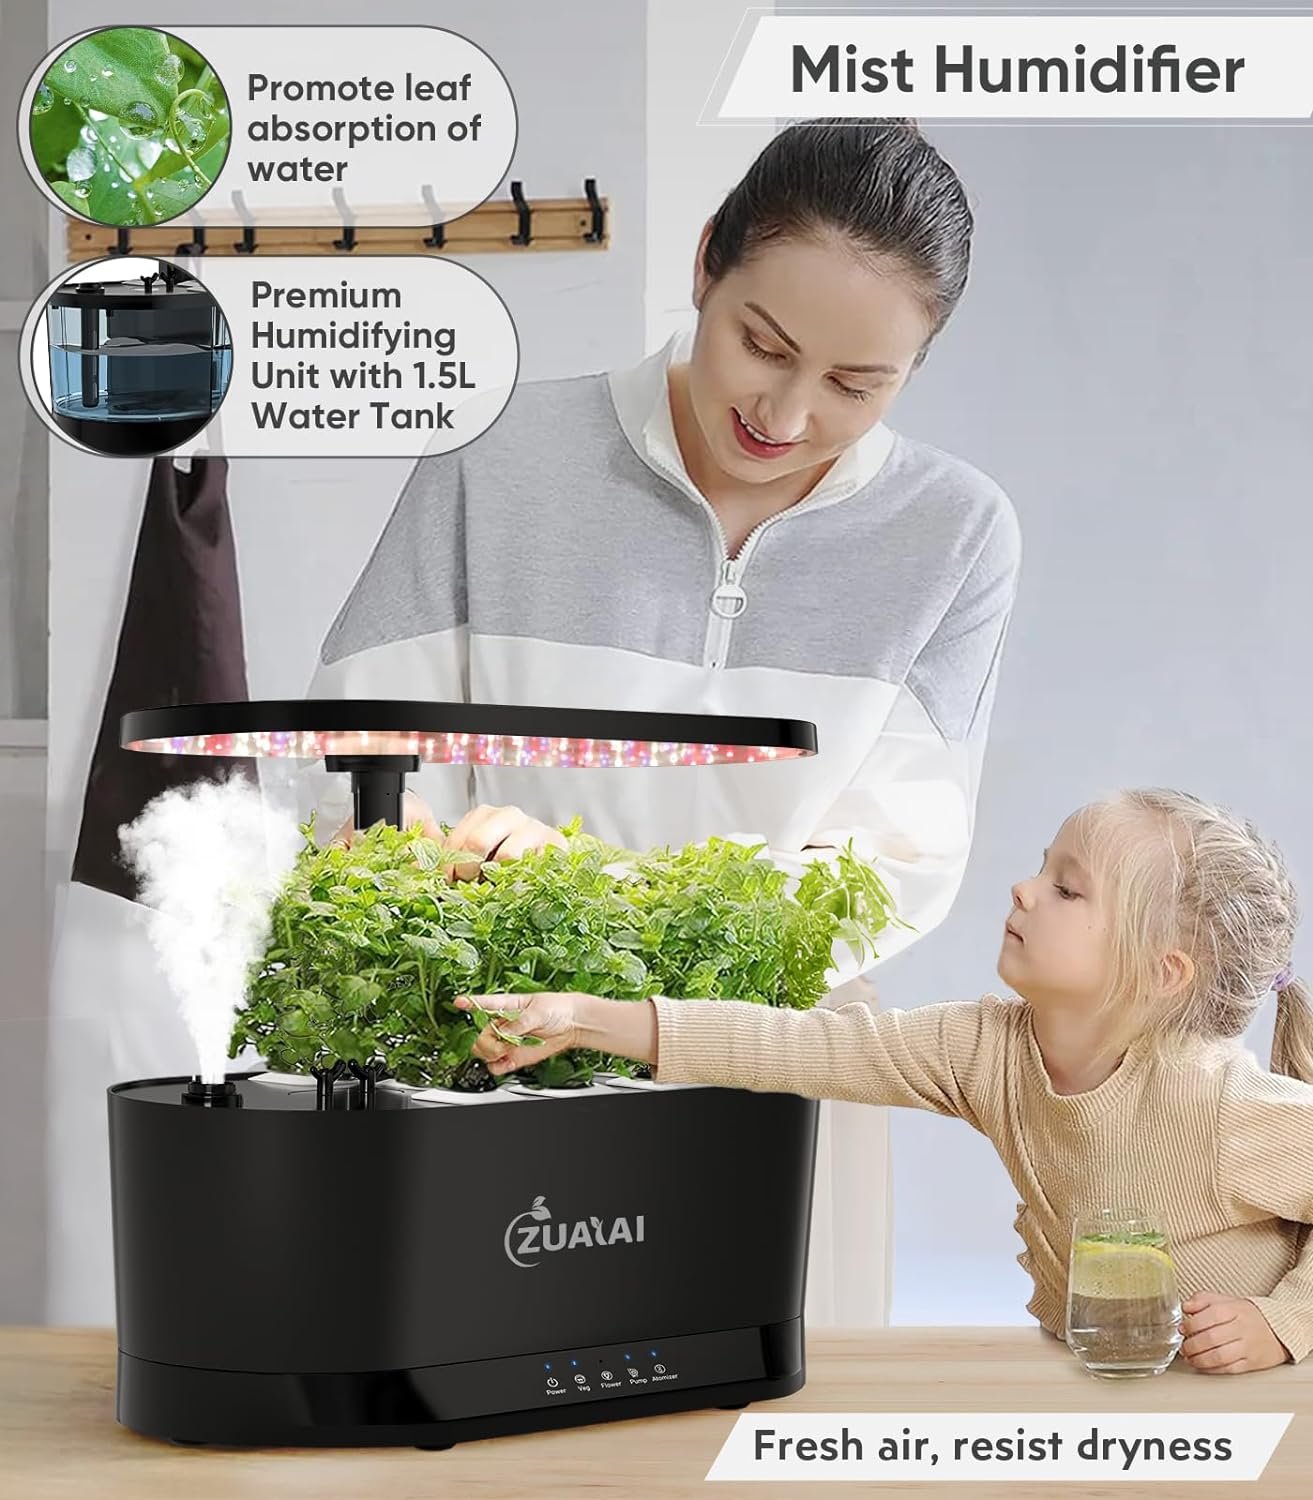 Hydroponics Growing System Indoor Garden: 8Pods Plant Germination Kit with Height Adjustable LED Grow Light, Indoor Hydroponic Growing System Herb Garden, Christmas Gifts for Women